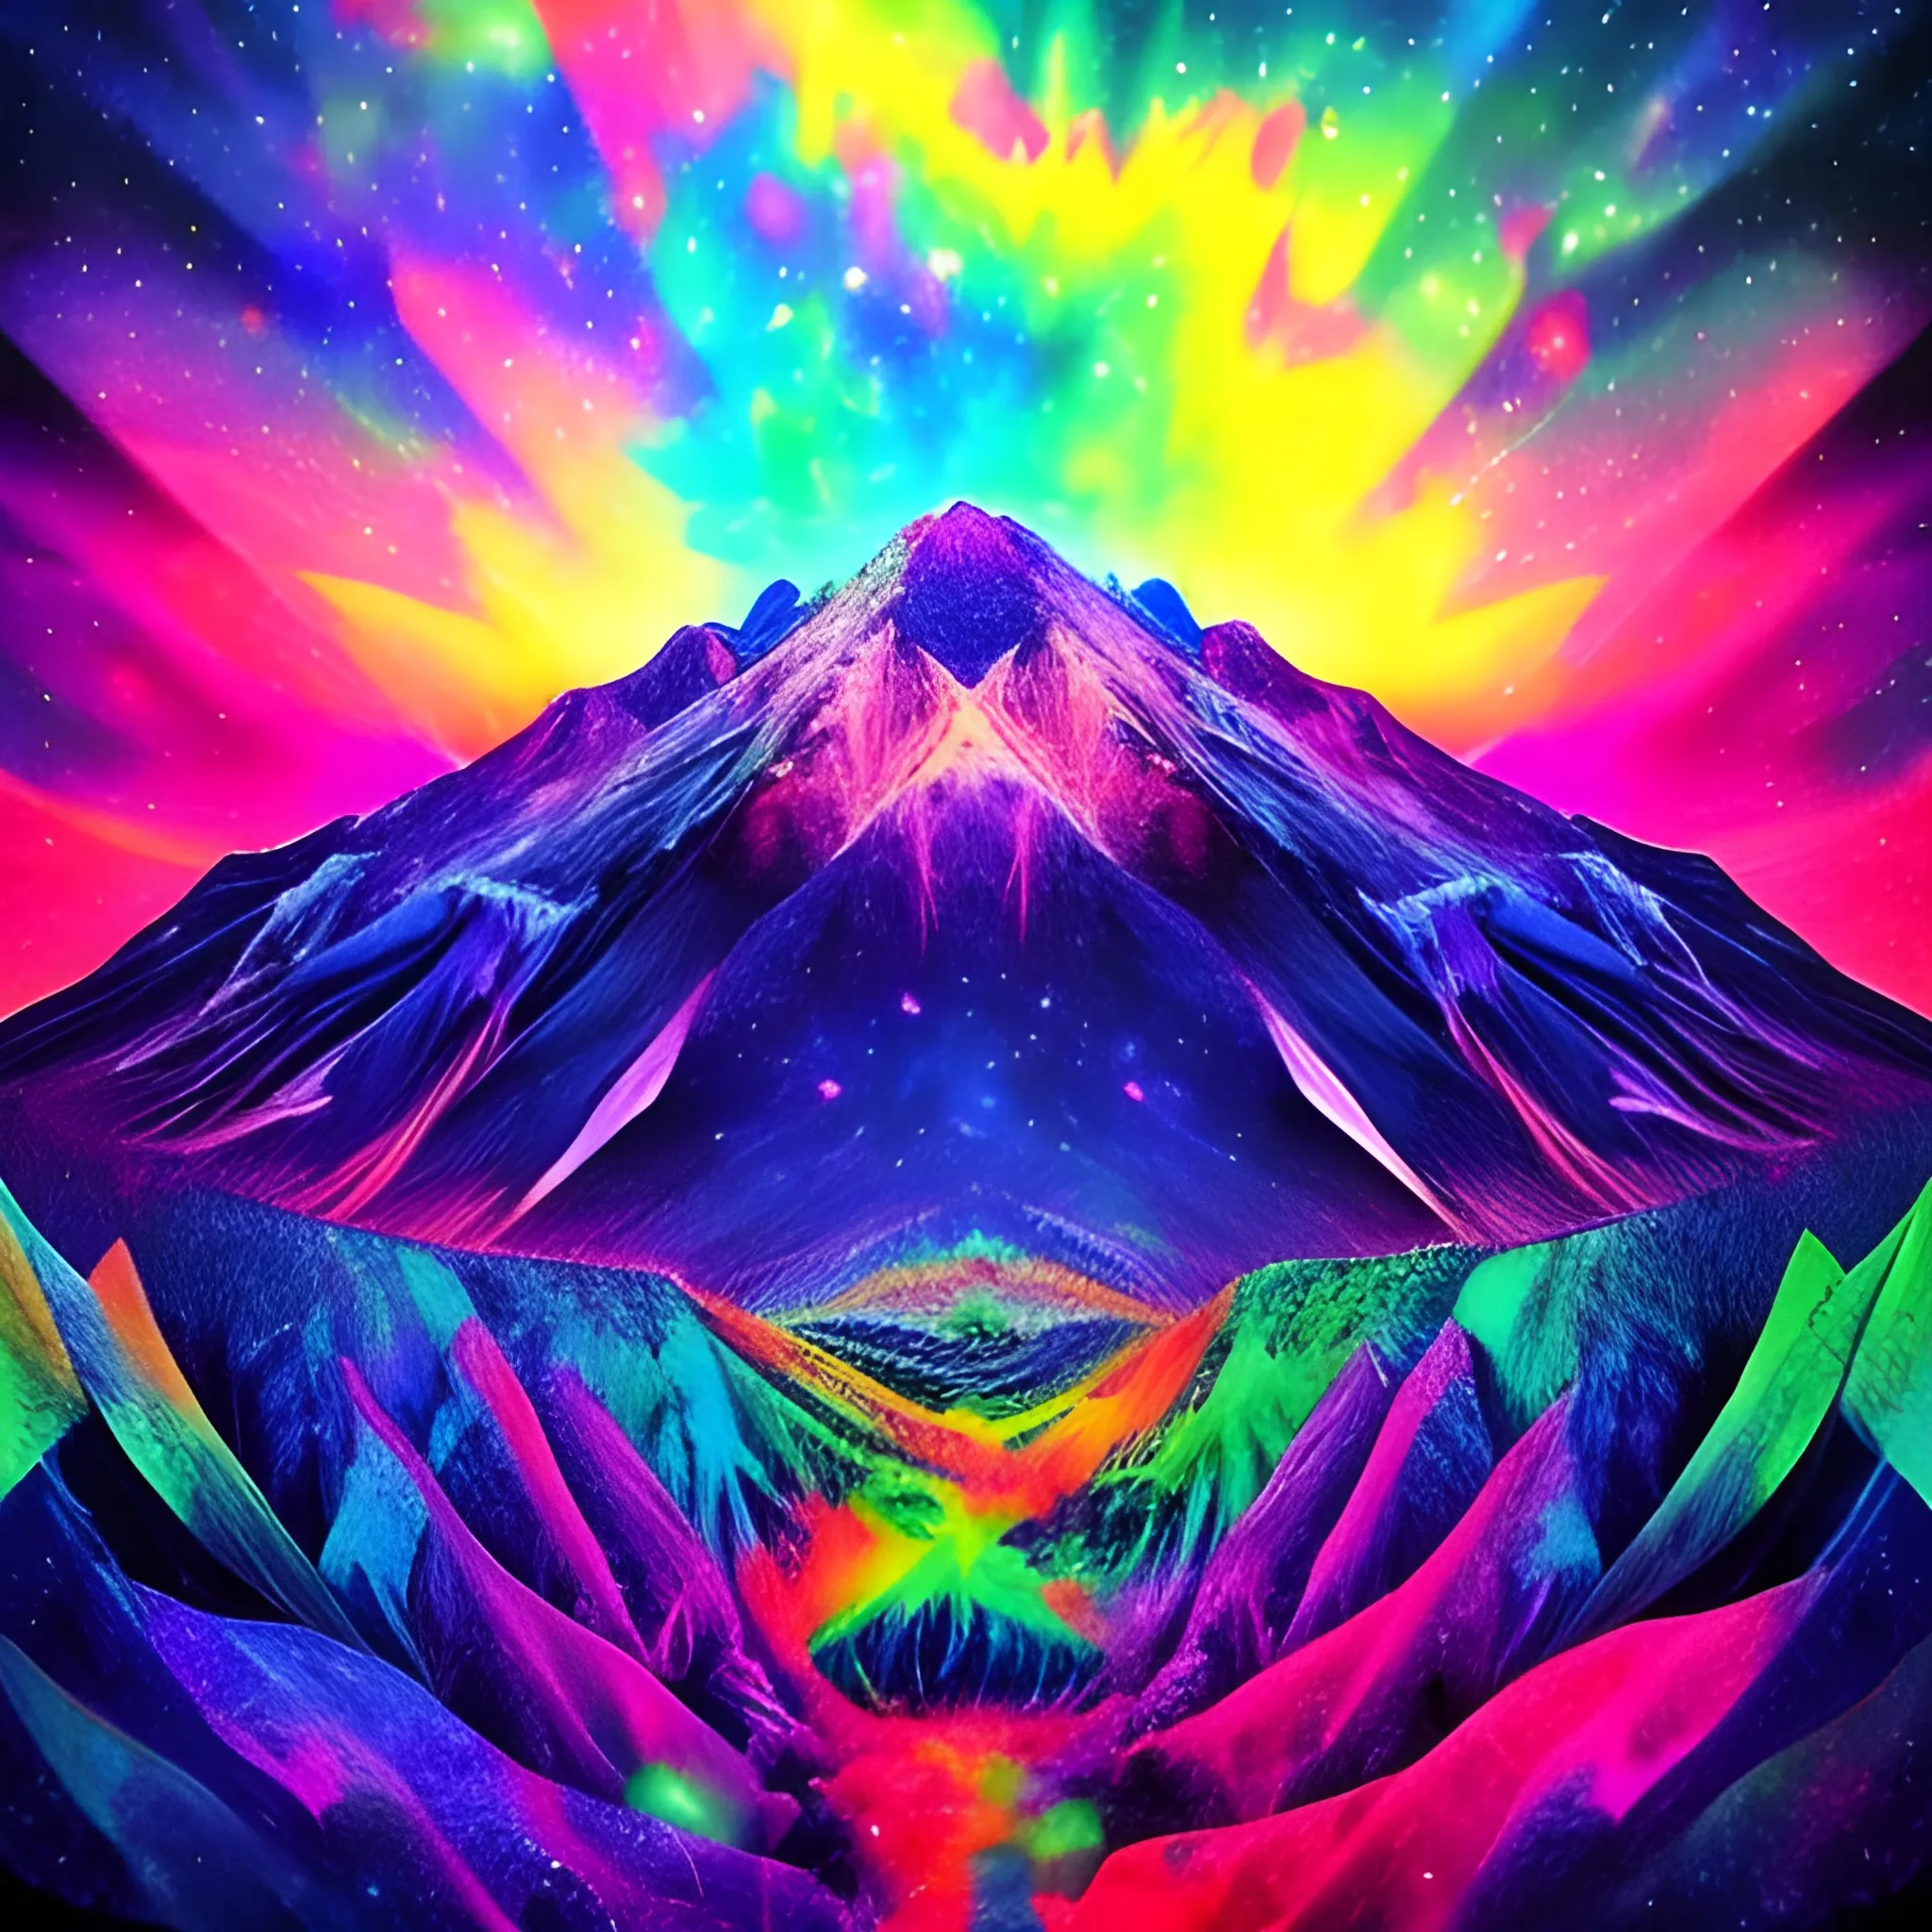 Trippy, mount olympus
, music, colorful, universe
